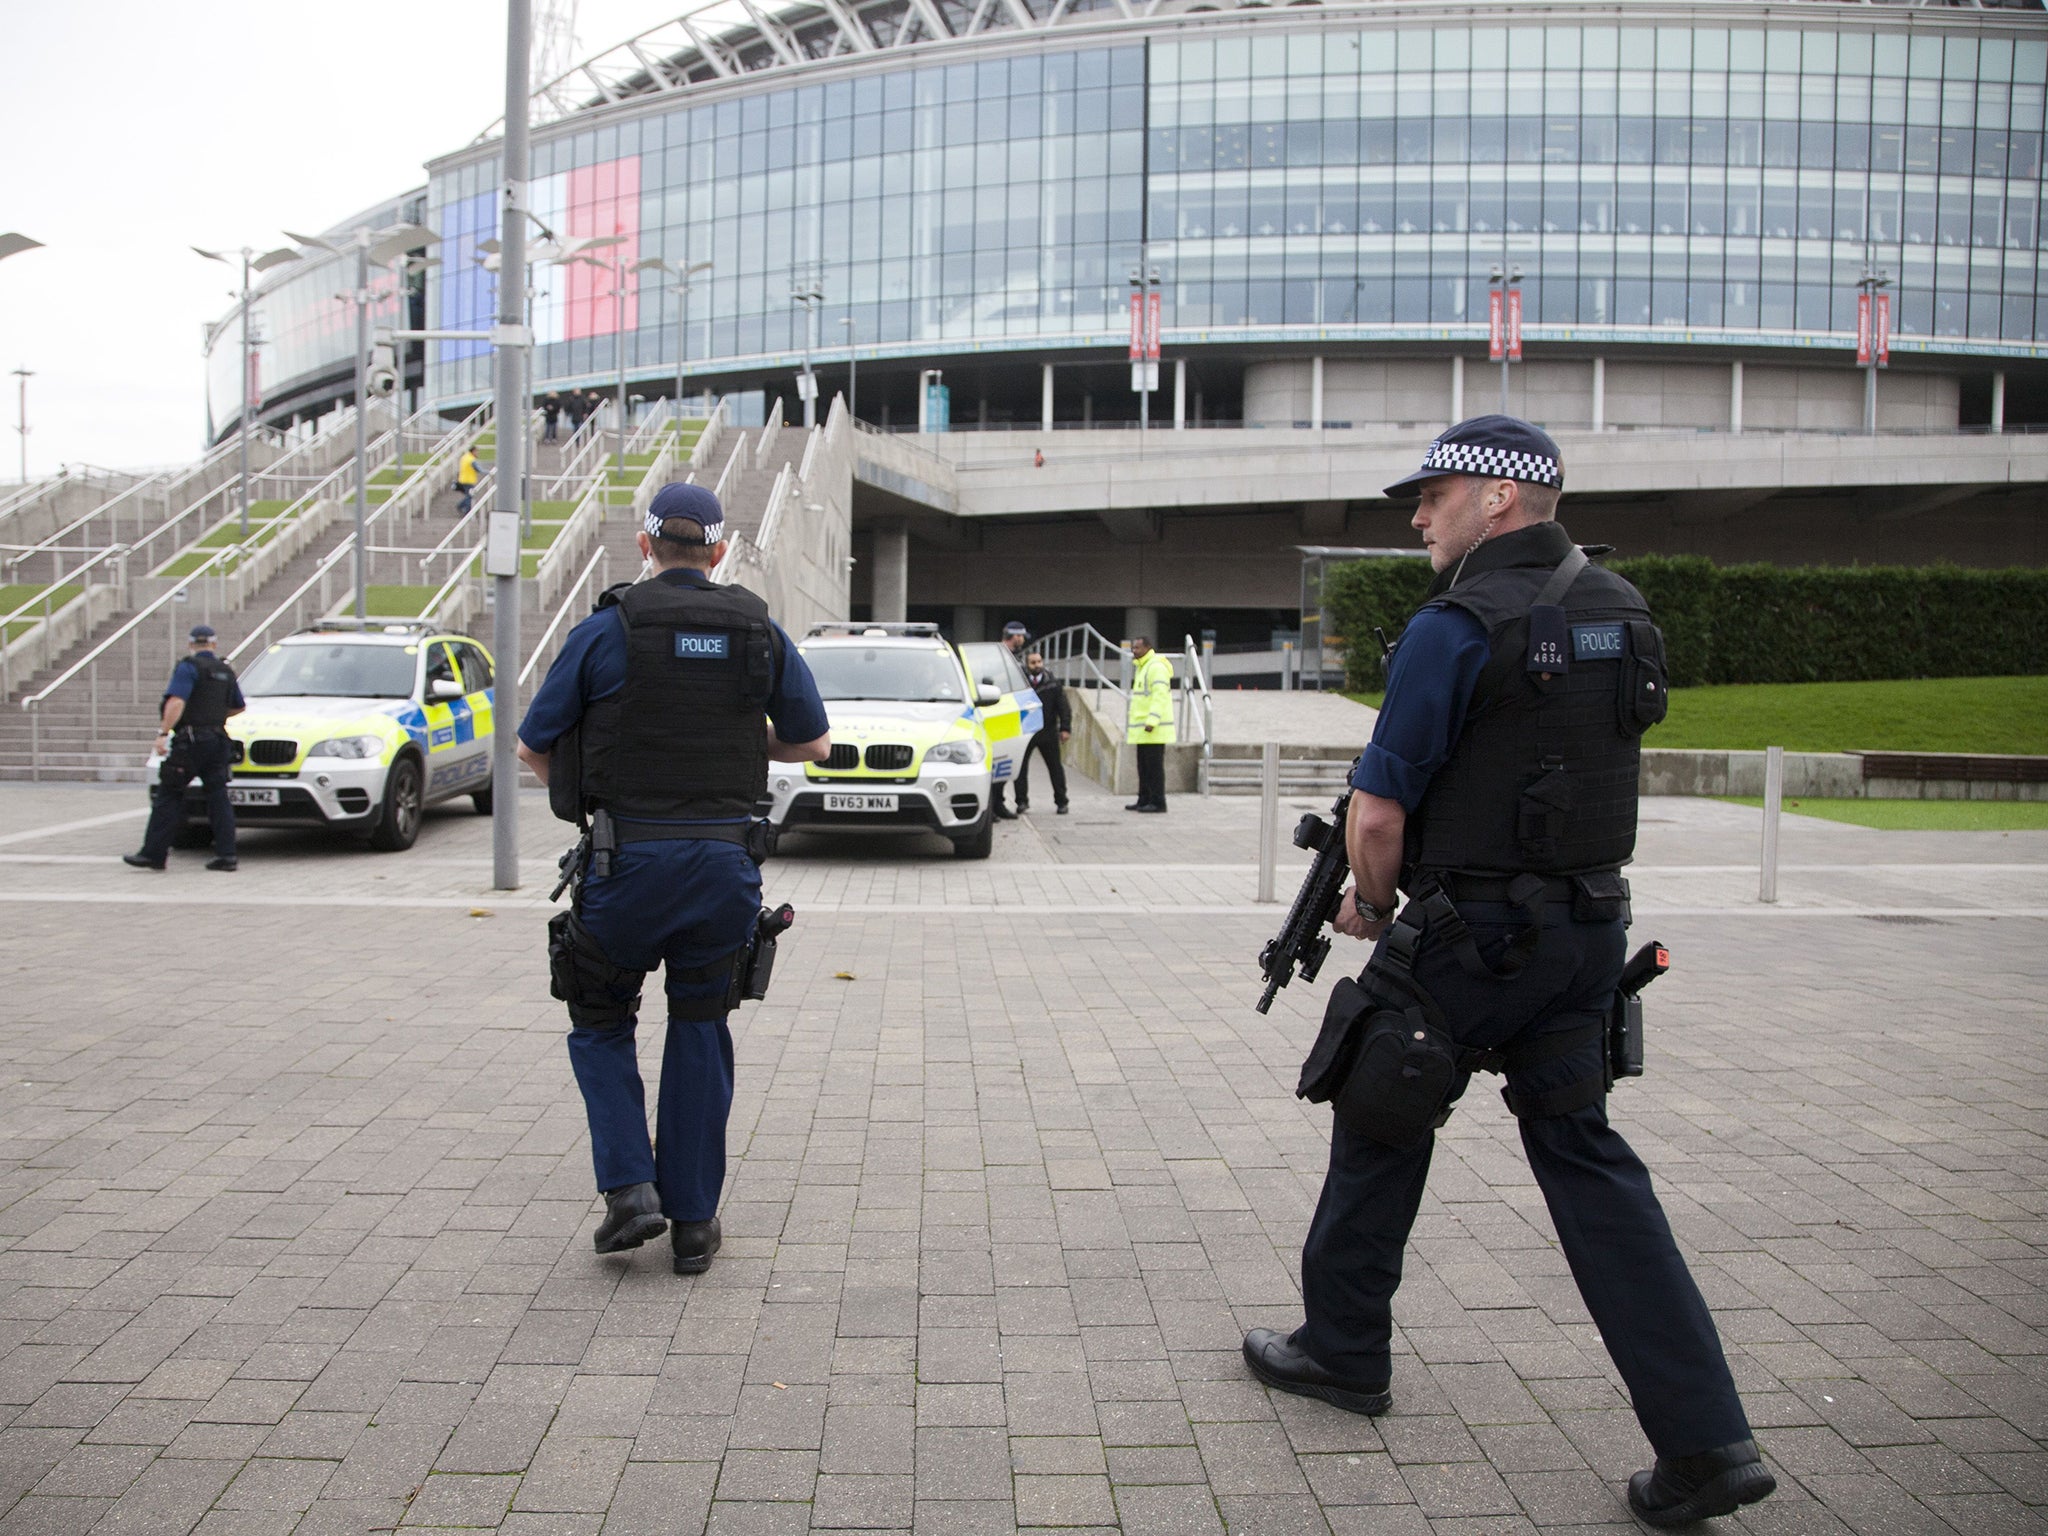 Armed police officers outside Wembley Stadium